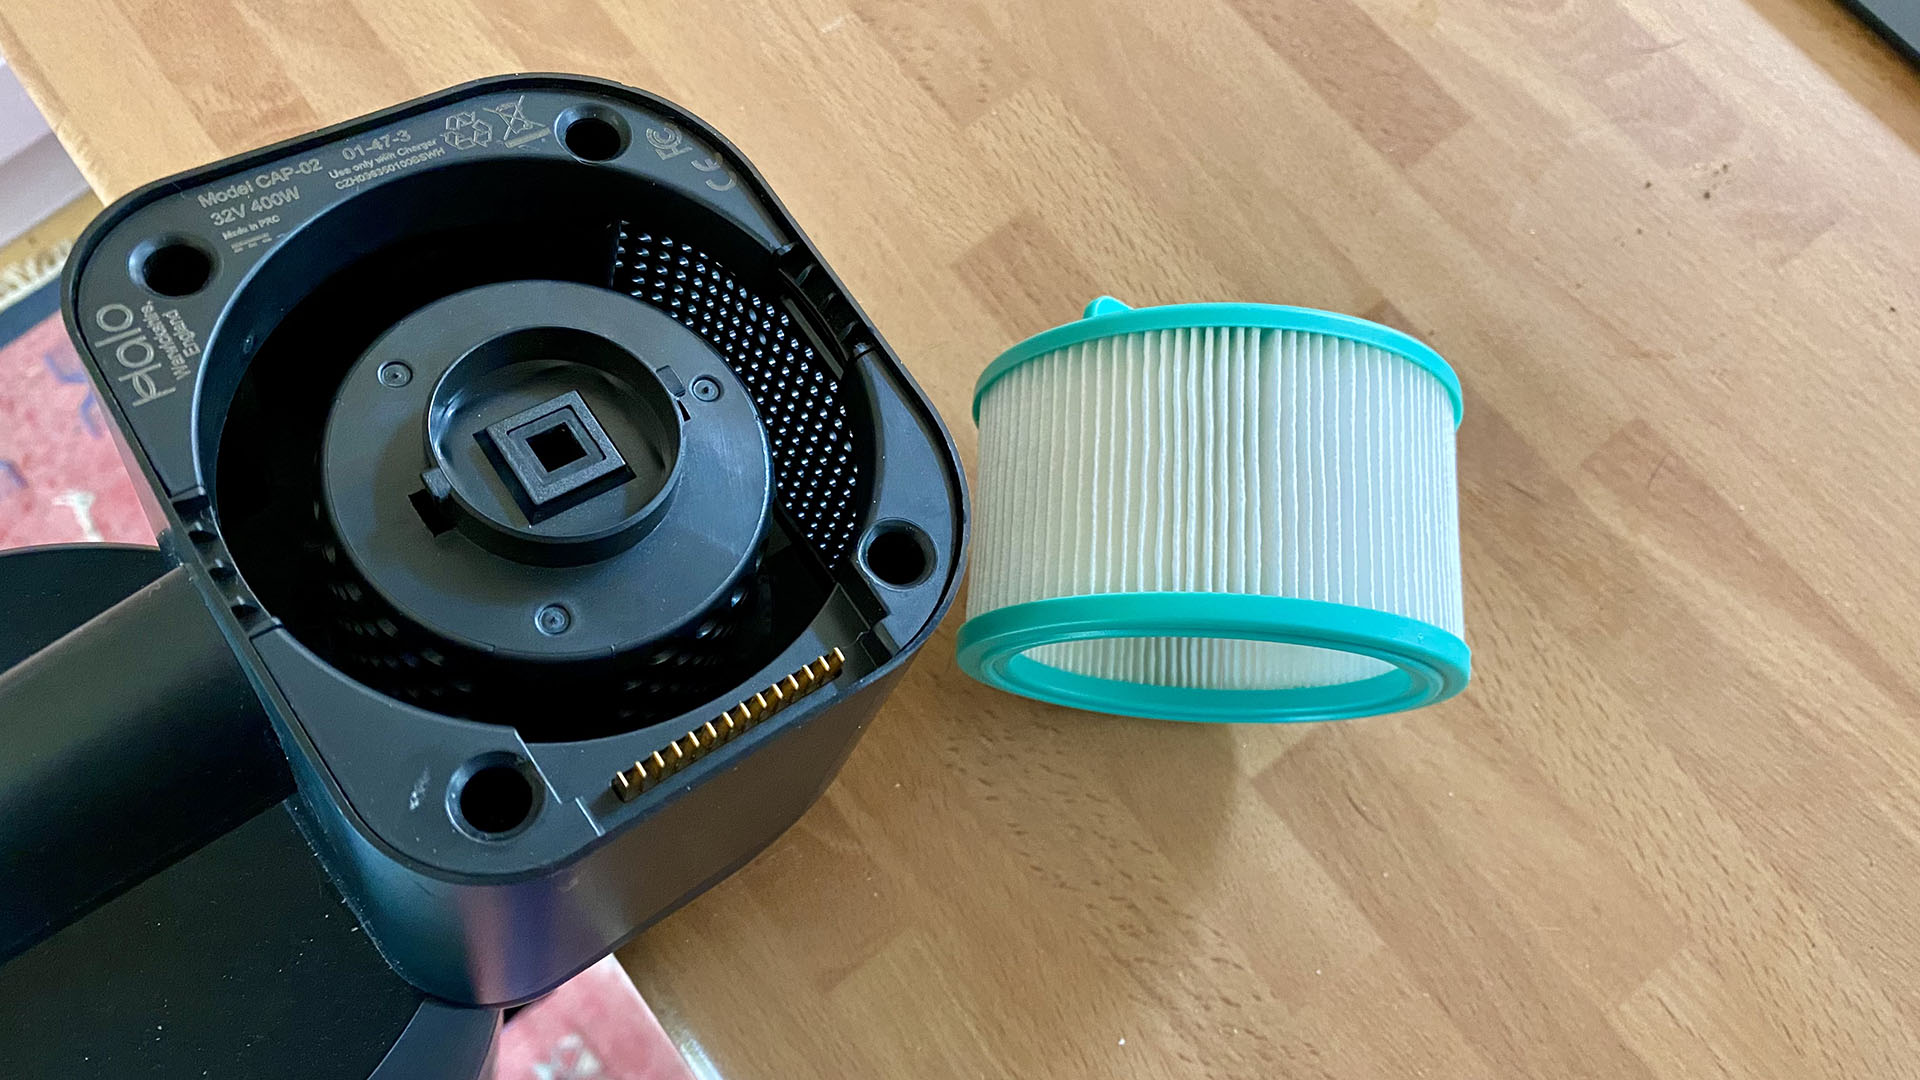 Still-clean filter from Halo Capsule X vacuum cleaner